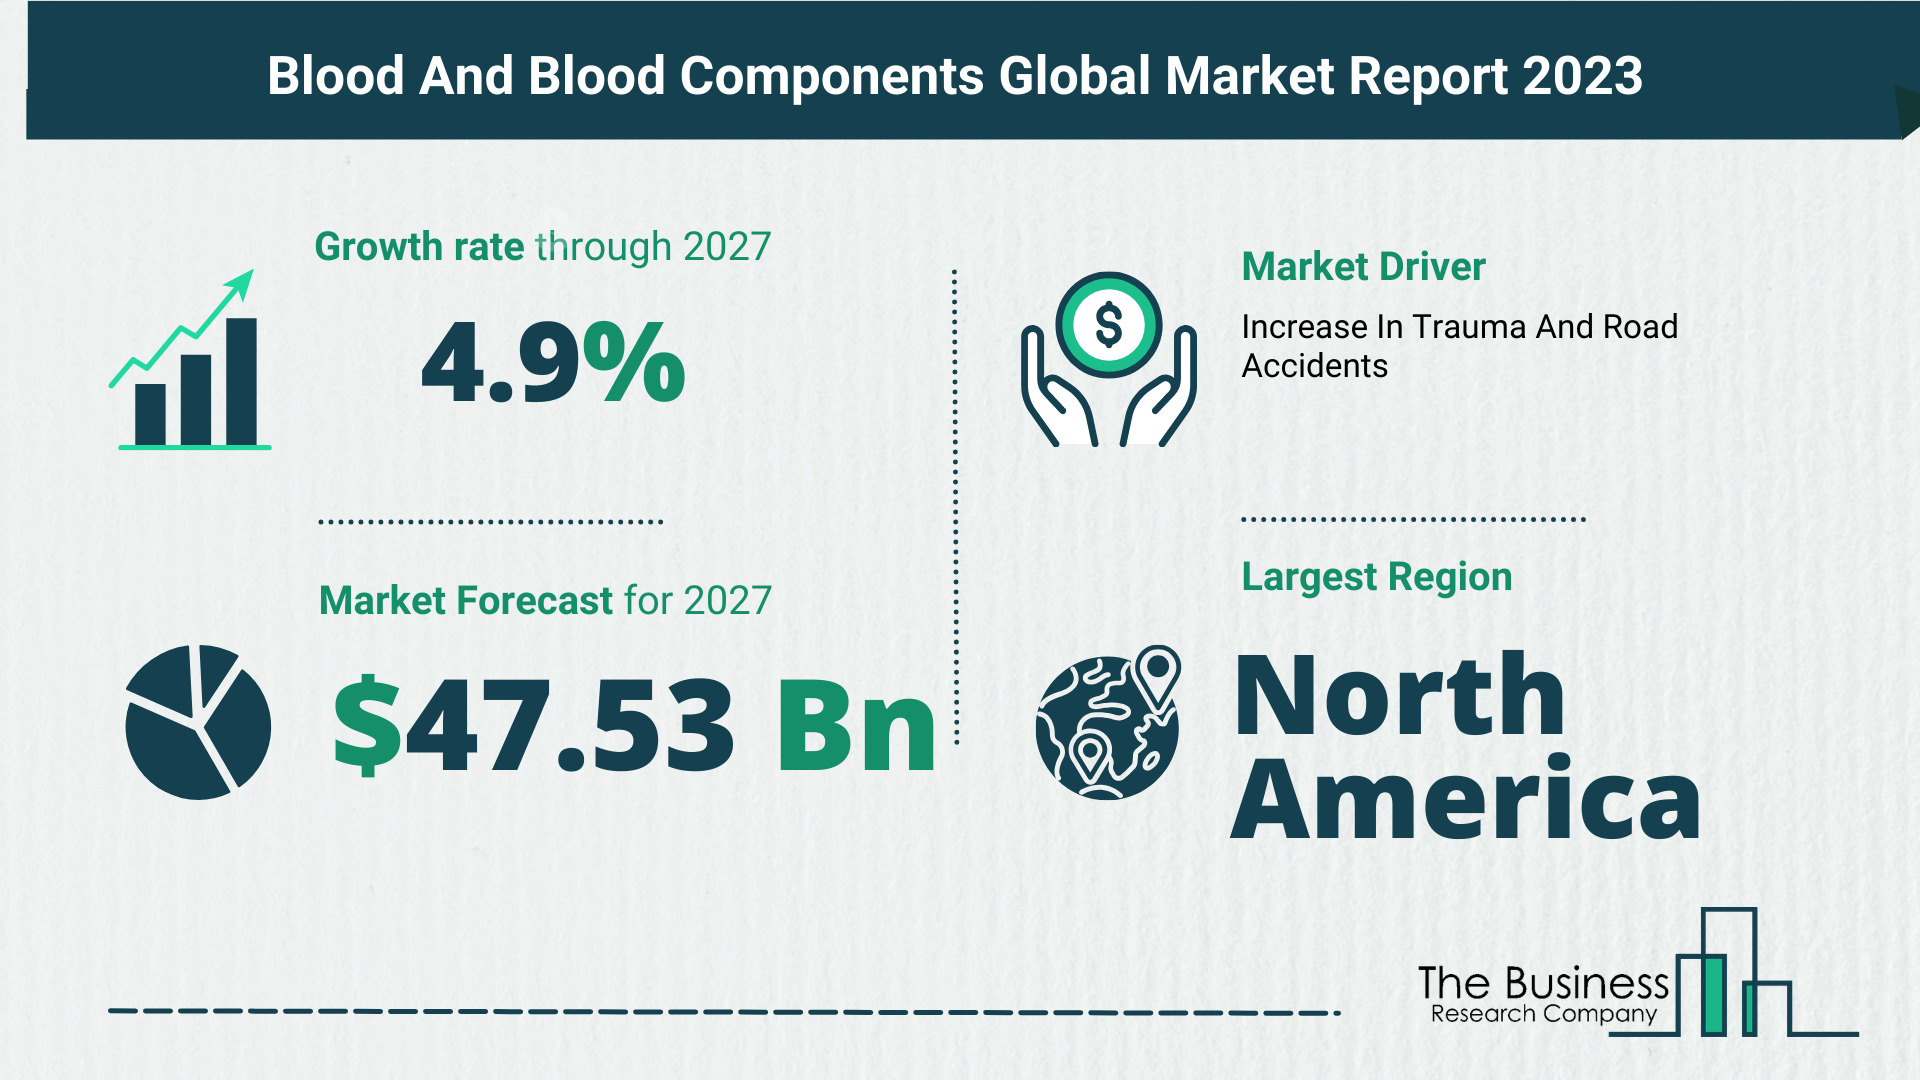 Overview Of The Blood And Blood Components Market 2023: Size, Drivers, And Trends